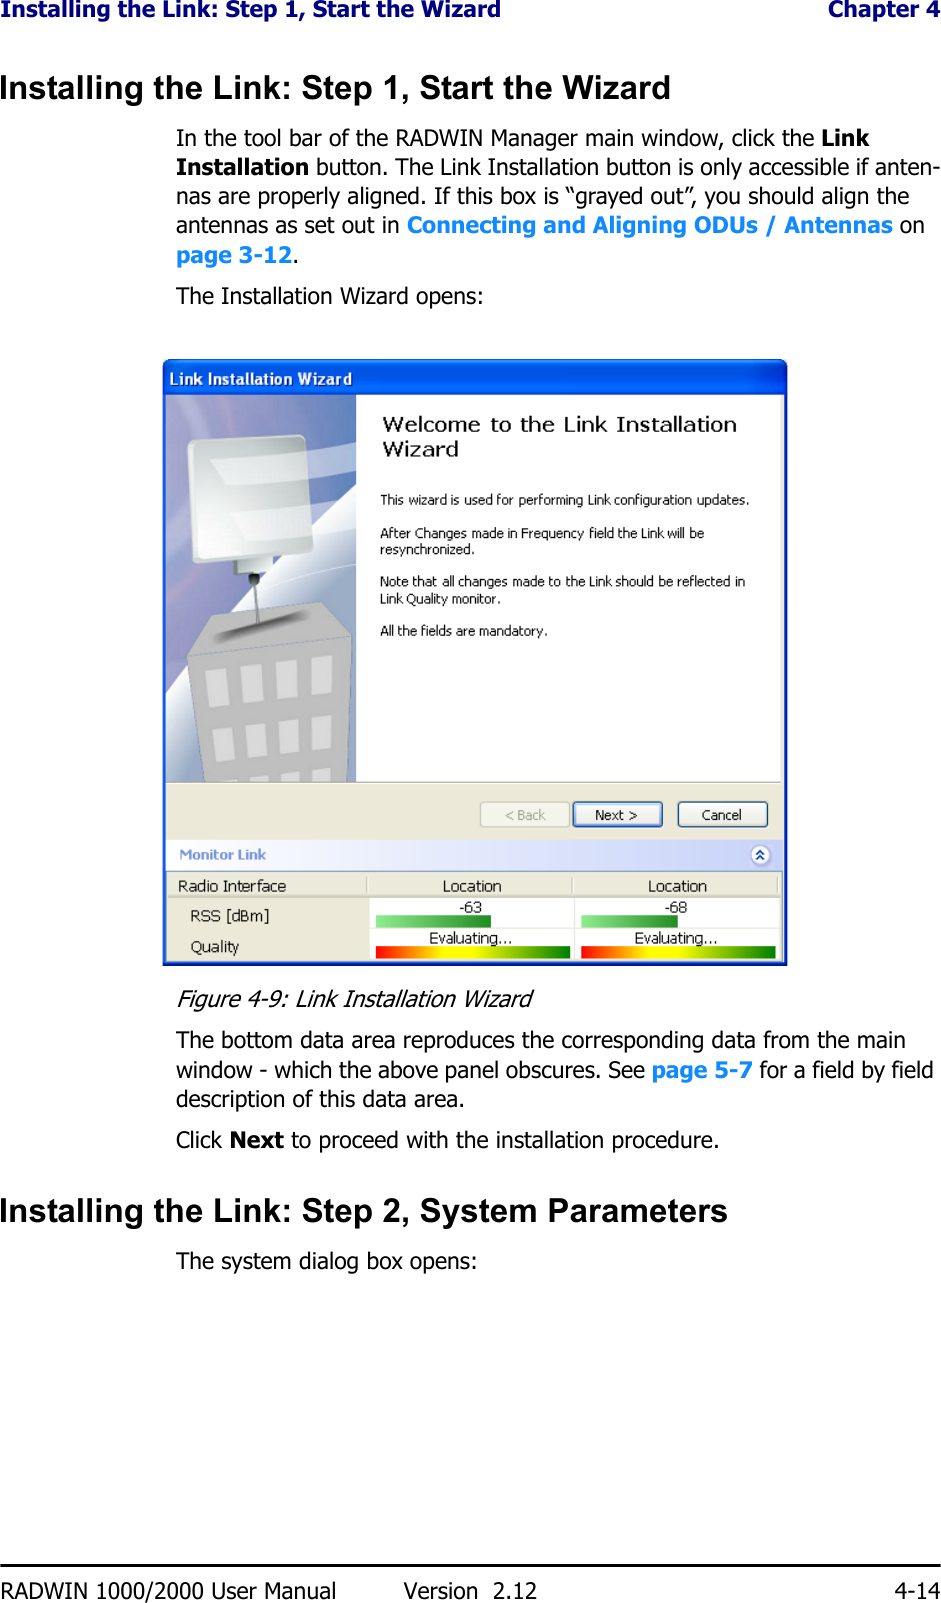 Installing the Link: Step 1, Start the Wizard  Chapter 4RADWIN 1000/2000 User Manual Version  2.12 4-14Installing the Link: Step 1, Start the WizardIn the tool bar of the RADWIN Manager main window, click the Link Installation button. The Link Installation button is only accessible if anten-nas are properly aligned. If this box is “grayed out”, you should align the antennas as set out in Connecting and Aligning ODUs / Antennas on page 3-12.The Installation Wizard opens:Figure 4-9: Link Installation WizardThe bottom data area reproduces the corresponding data from the main window - which the above panel obscures. See page 5-7 for a field by field description of this data area.Click Next to proceed with the installation procedure.Installing the Link: Step 2, System ParametersThe system dialog box opens: